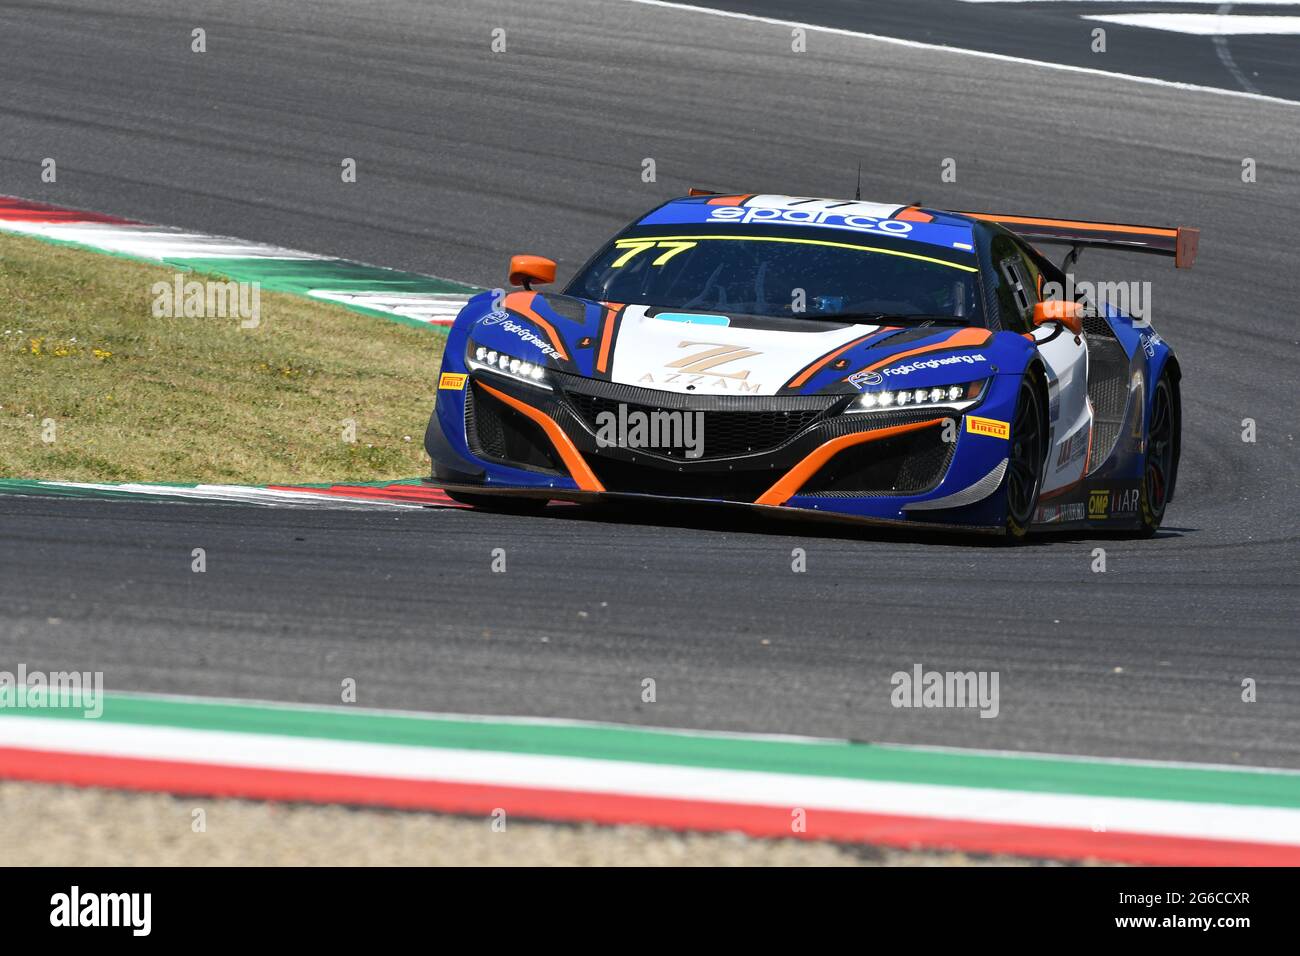 Scarperia, (IT) July 2, 2021: Honda NSX of Team Nova Race drive by Magnoni - Zanotti in action during Qualifyng session of Italian Championship GT in Stock Photo